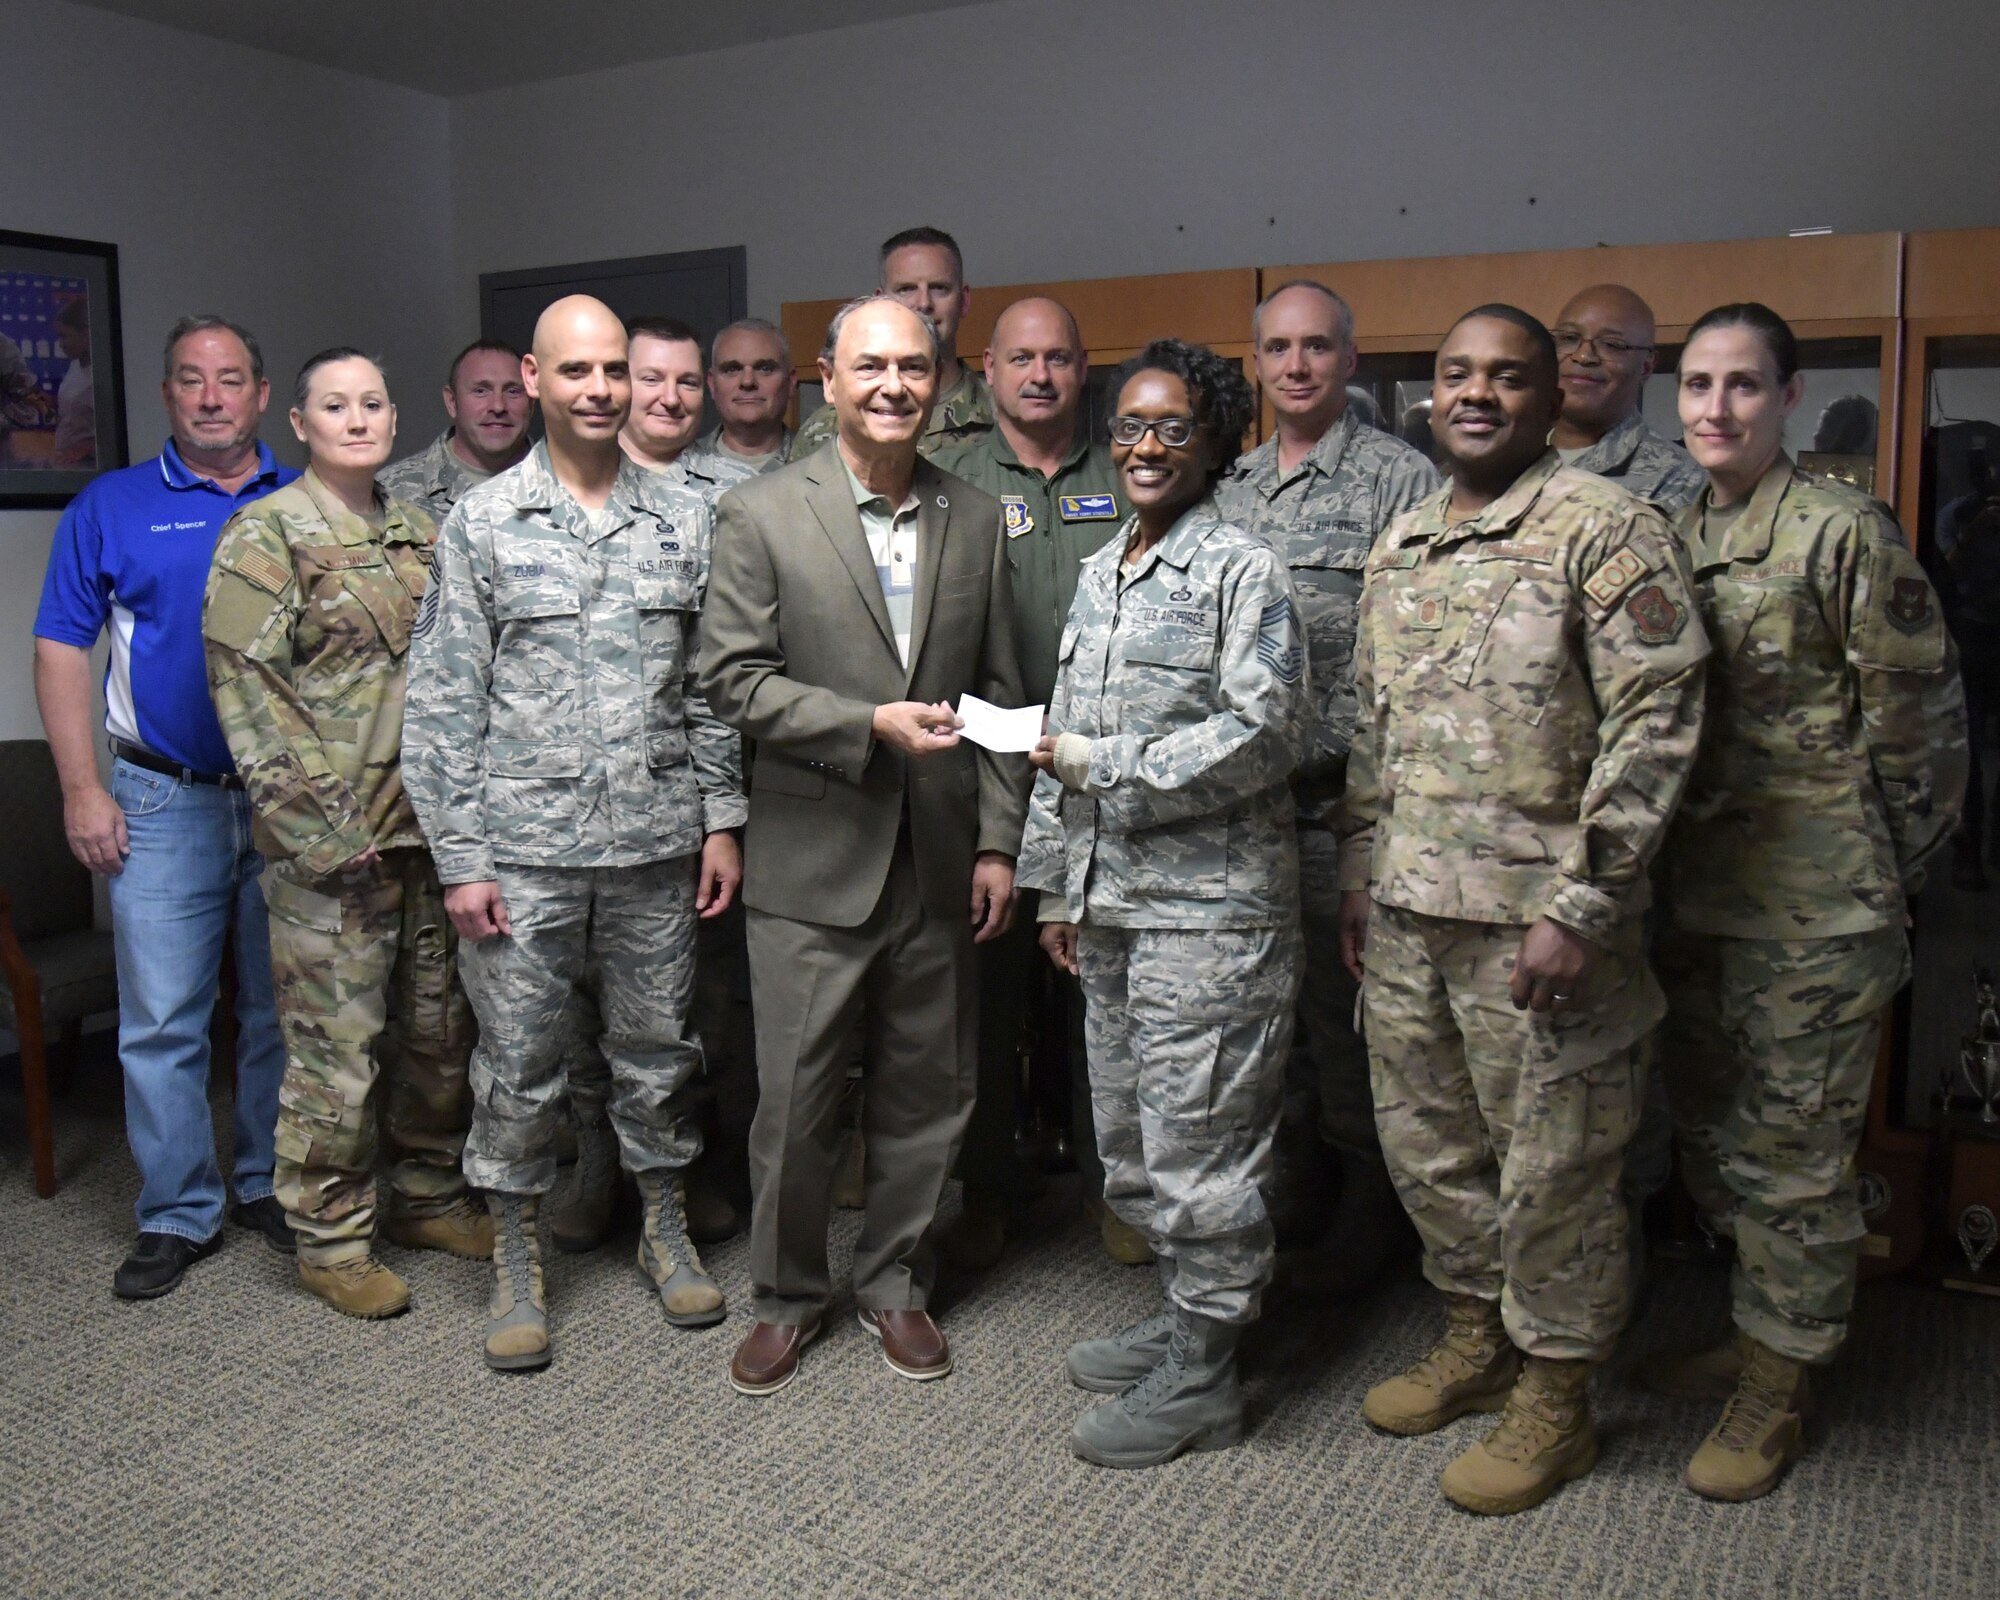 The Air Force Sergeants Association gave the Dobbins Chiefs Group a check for $300 on Dec. 6, 2019. The donation will go toward the Dobbins Chiefs Group Scholarship as well as other programs related to morale and welfare of enlisted Airmen at Dobbins, said Chief Master Sergeant Stephanie Gillis, 700th Airlift Squadron operations superintendent. (U.S. Air Force photo/Tech. Sgt. Andrew Park)